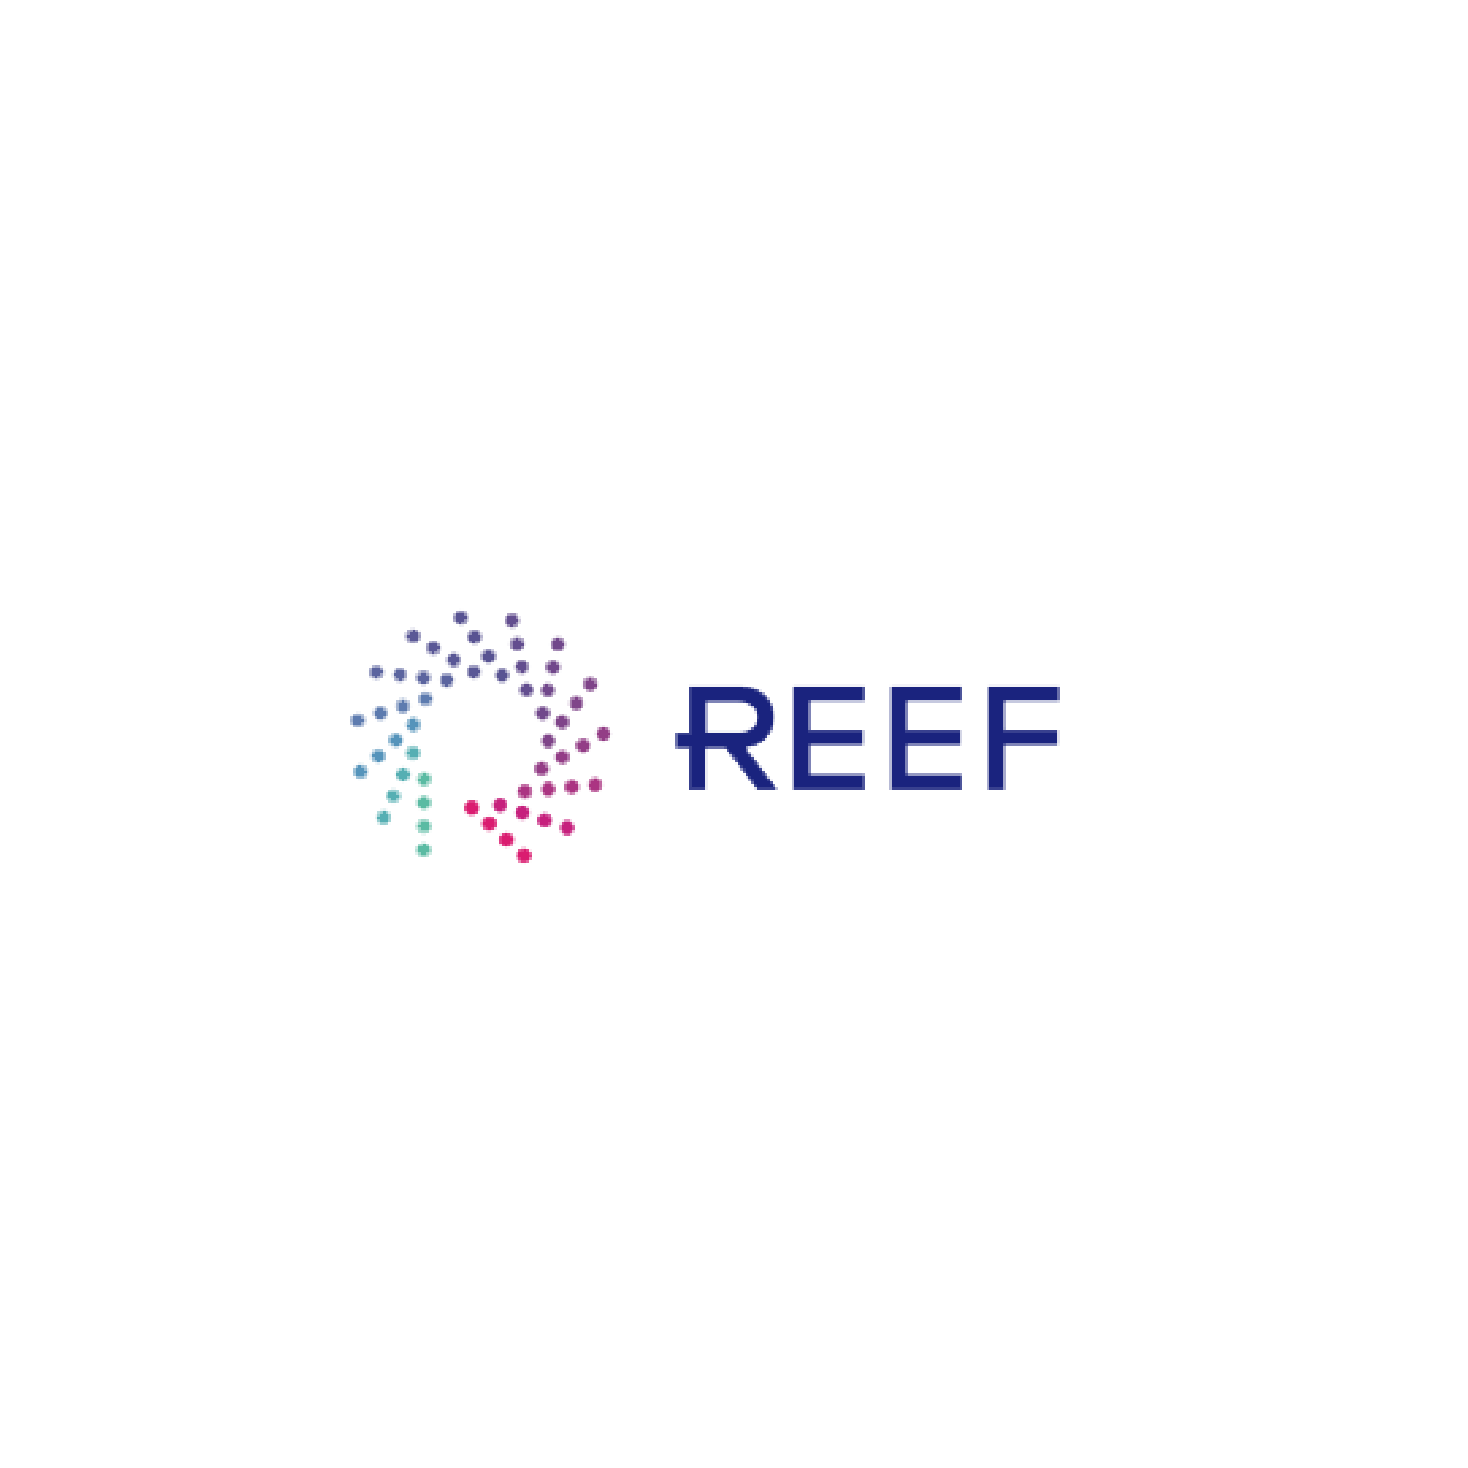 EAT Global Fulfillment & Infrastructure Partners - Reef